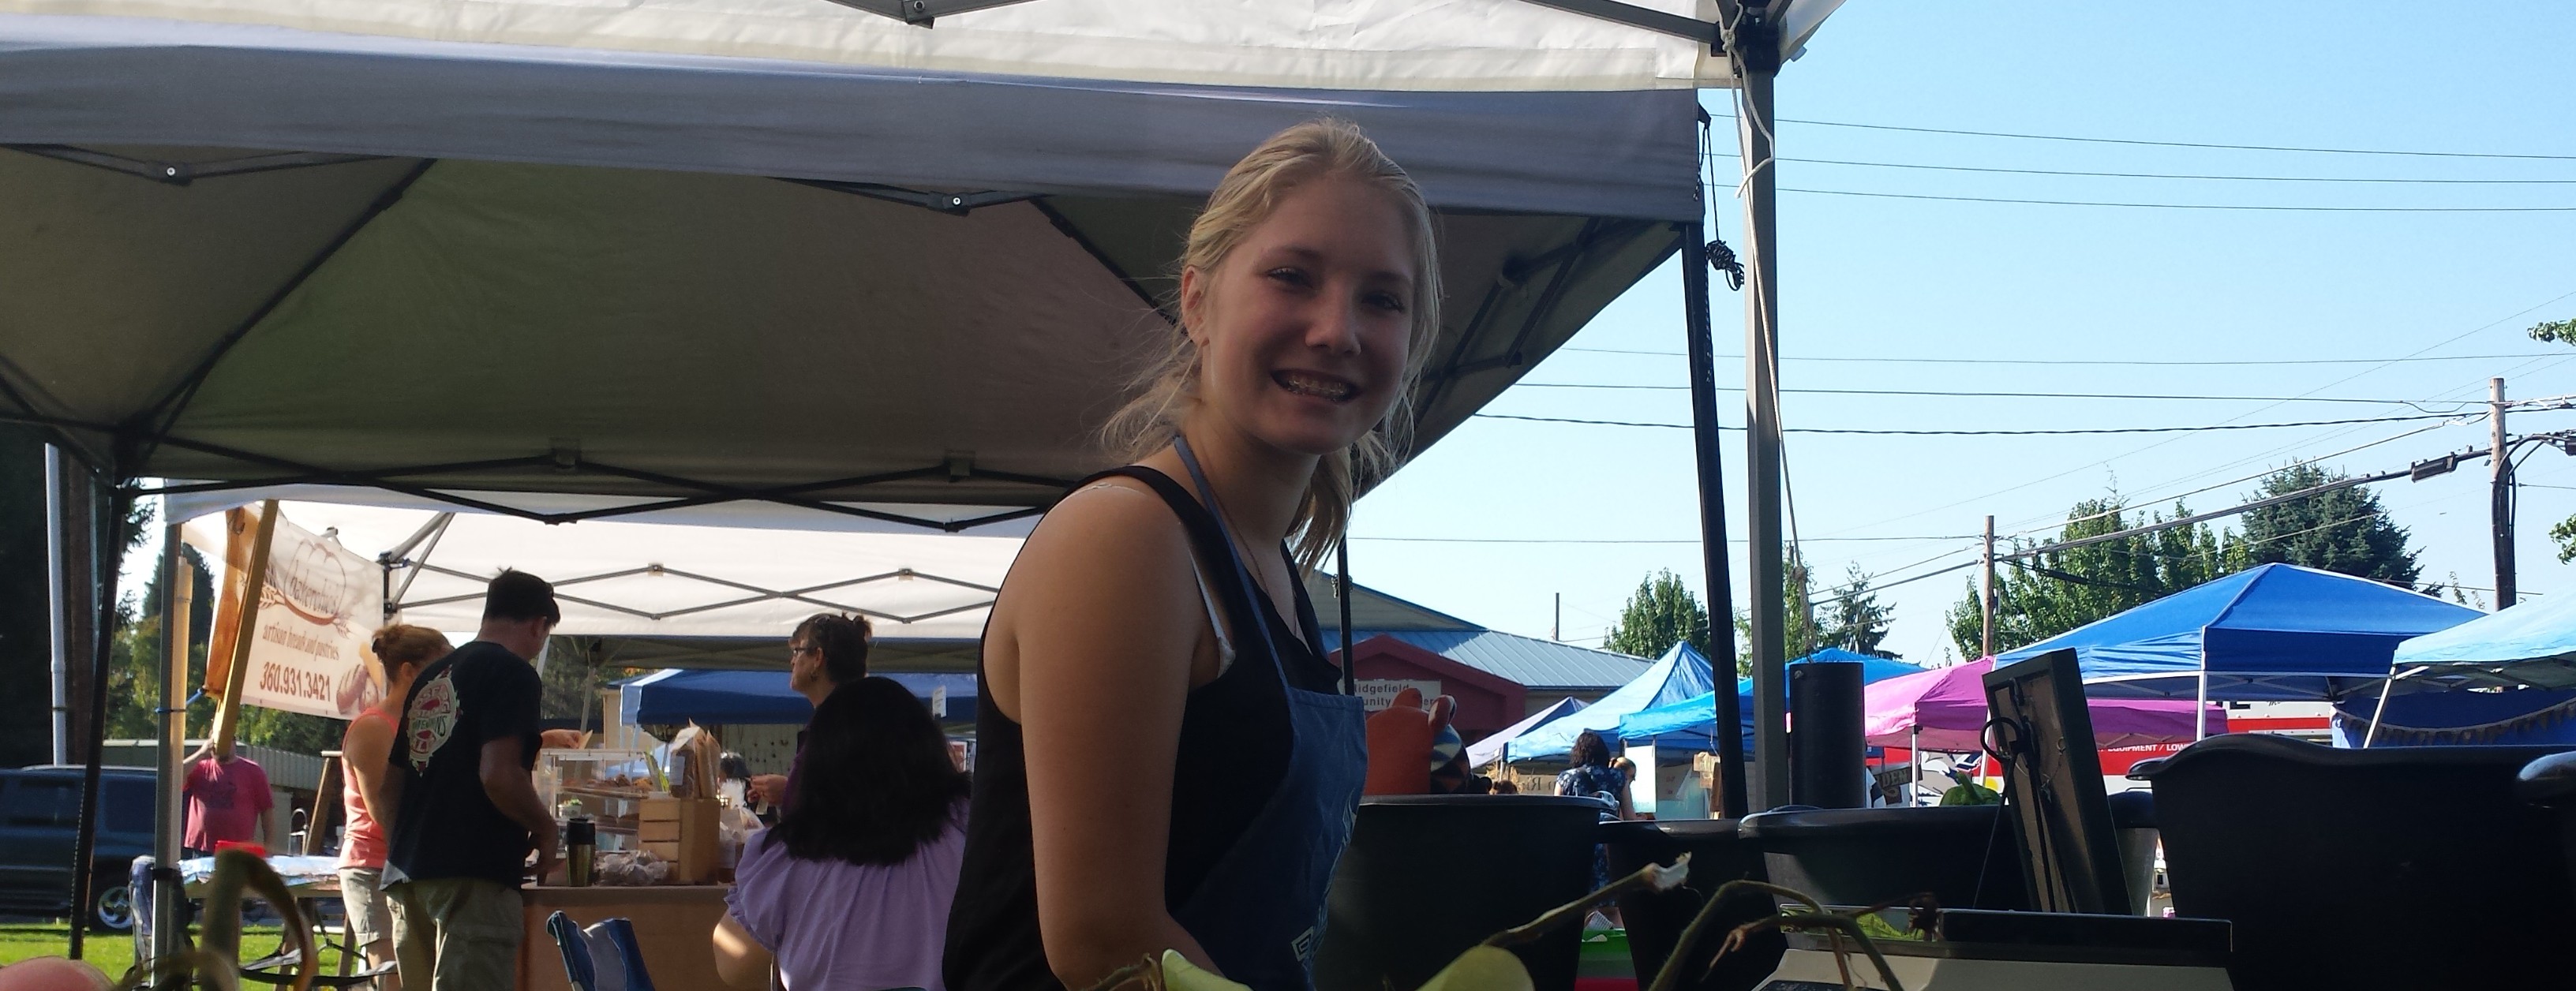 Kaylor Auger of Coyote Ridge Ranch organic foods was among the vendors at Ridgefield Heritage Day.